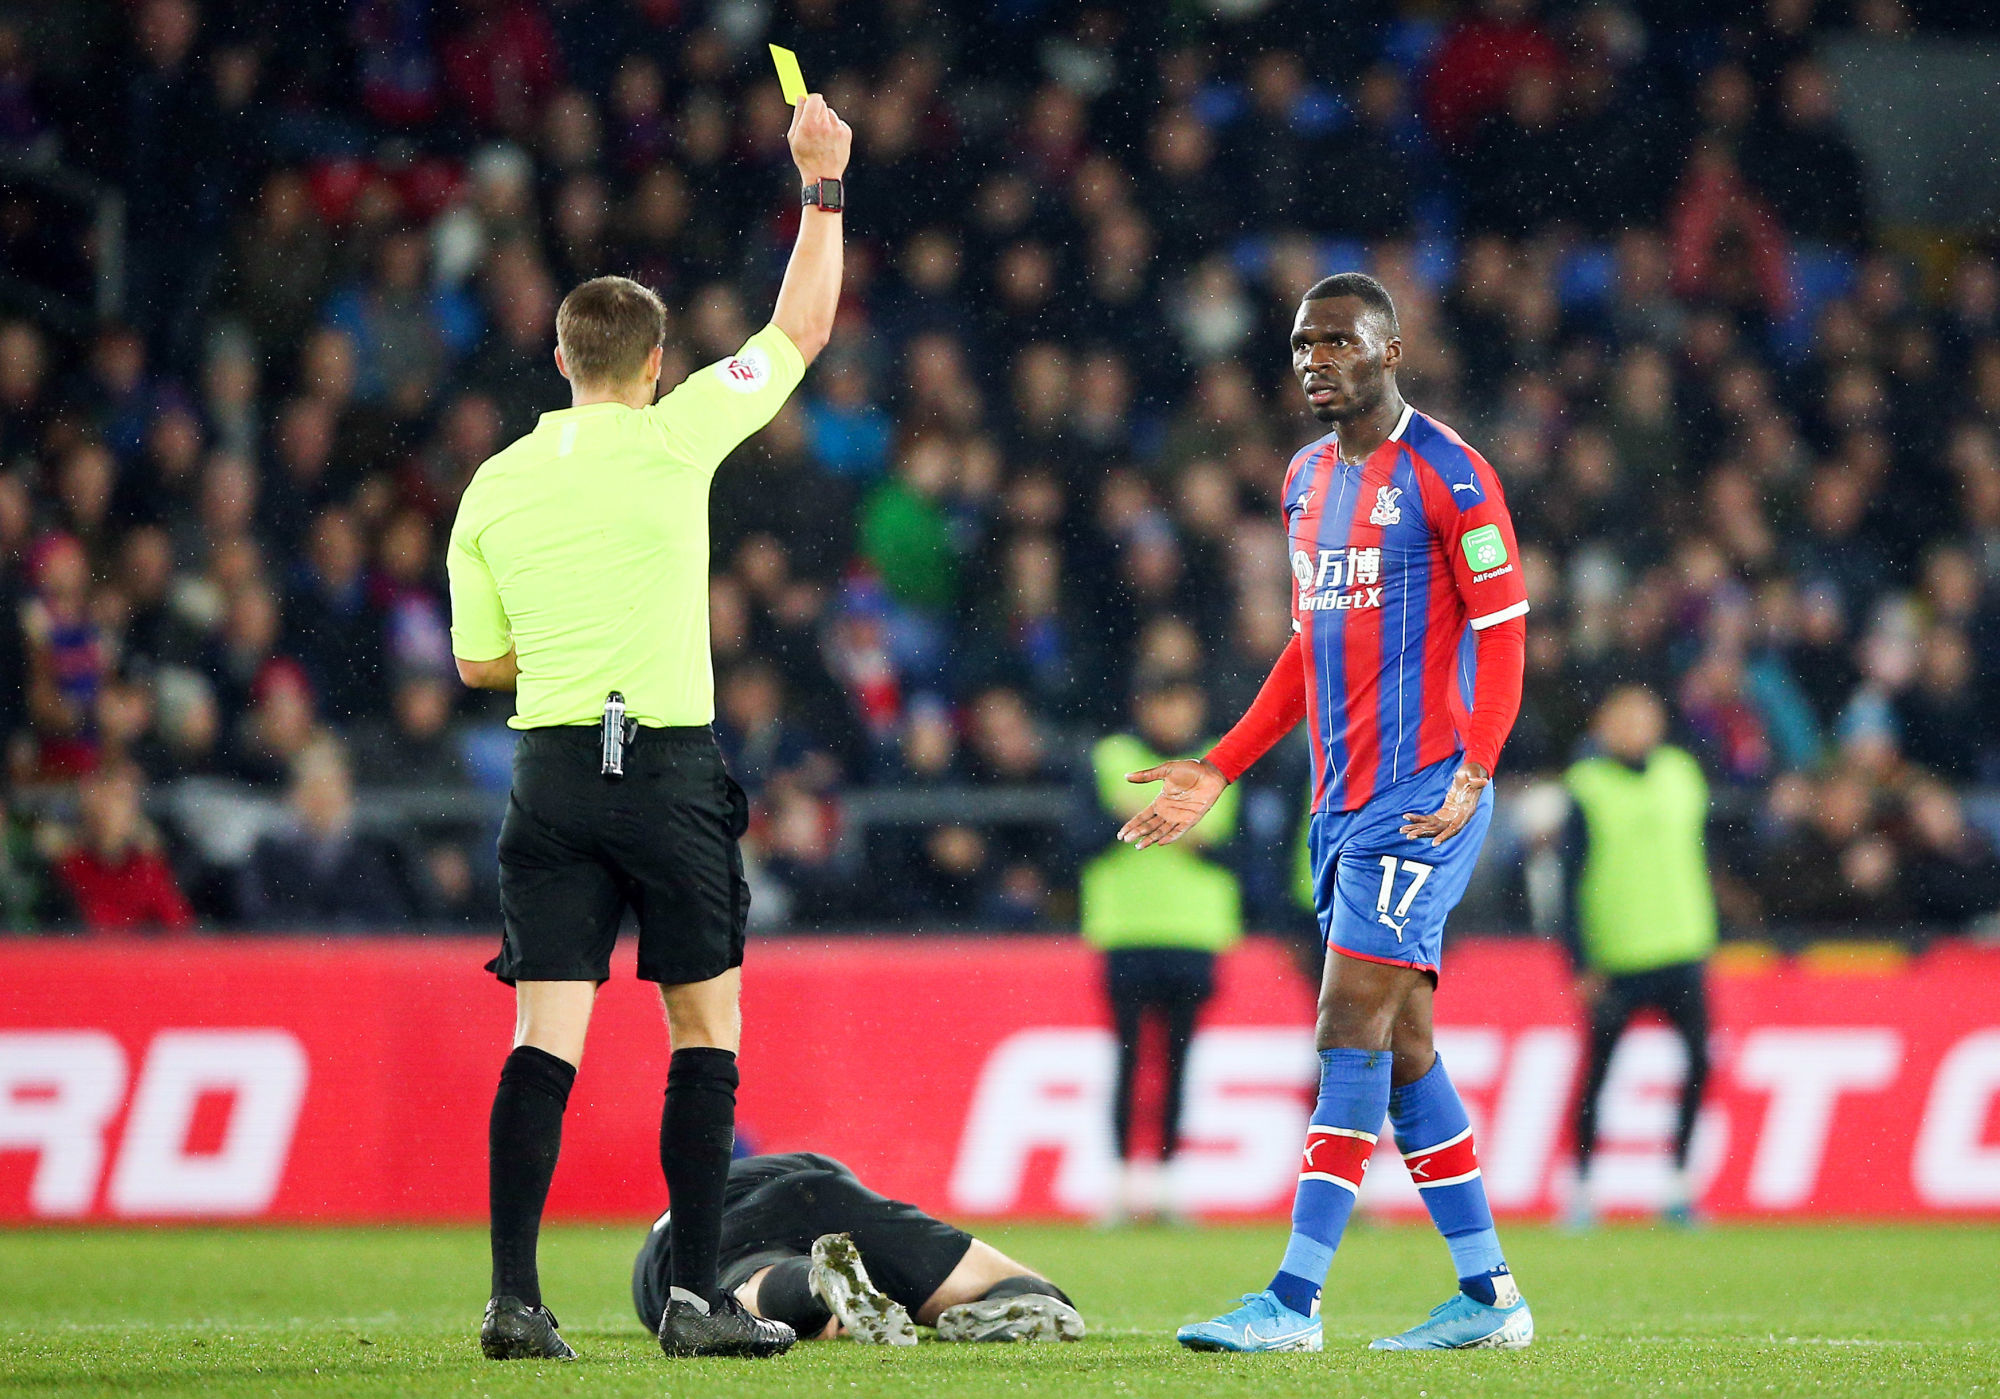 Crystal Palace's Christian Benteke is shown a yellow card during the Premier League match at Selhurst Park, London. 

Photo by Icon Sport - Christian BENTEKE - Selhurst Park - Londres (Angleterre)